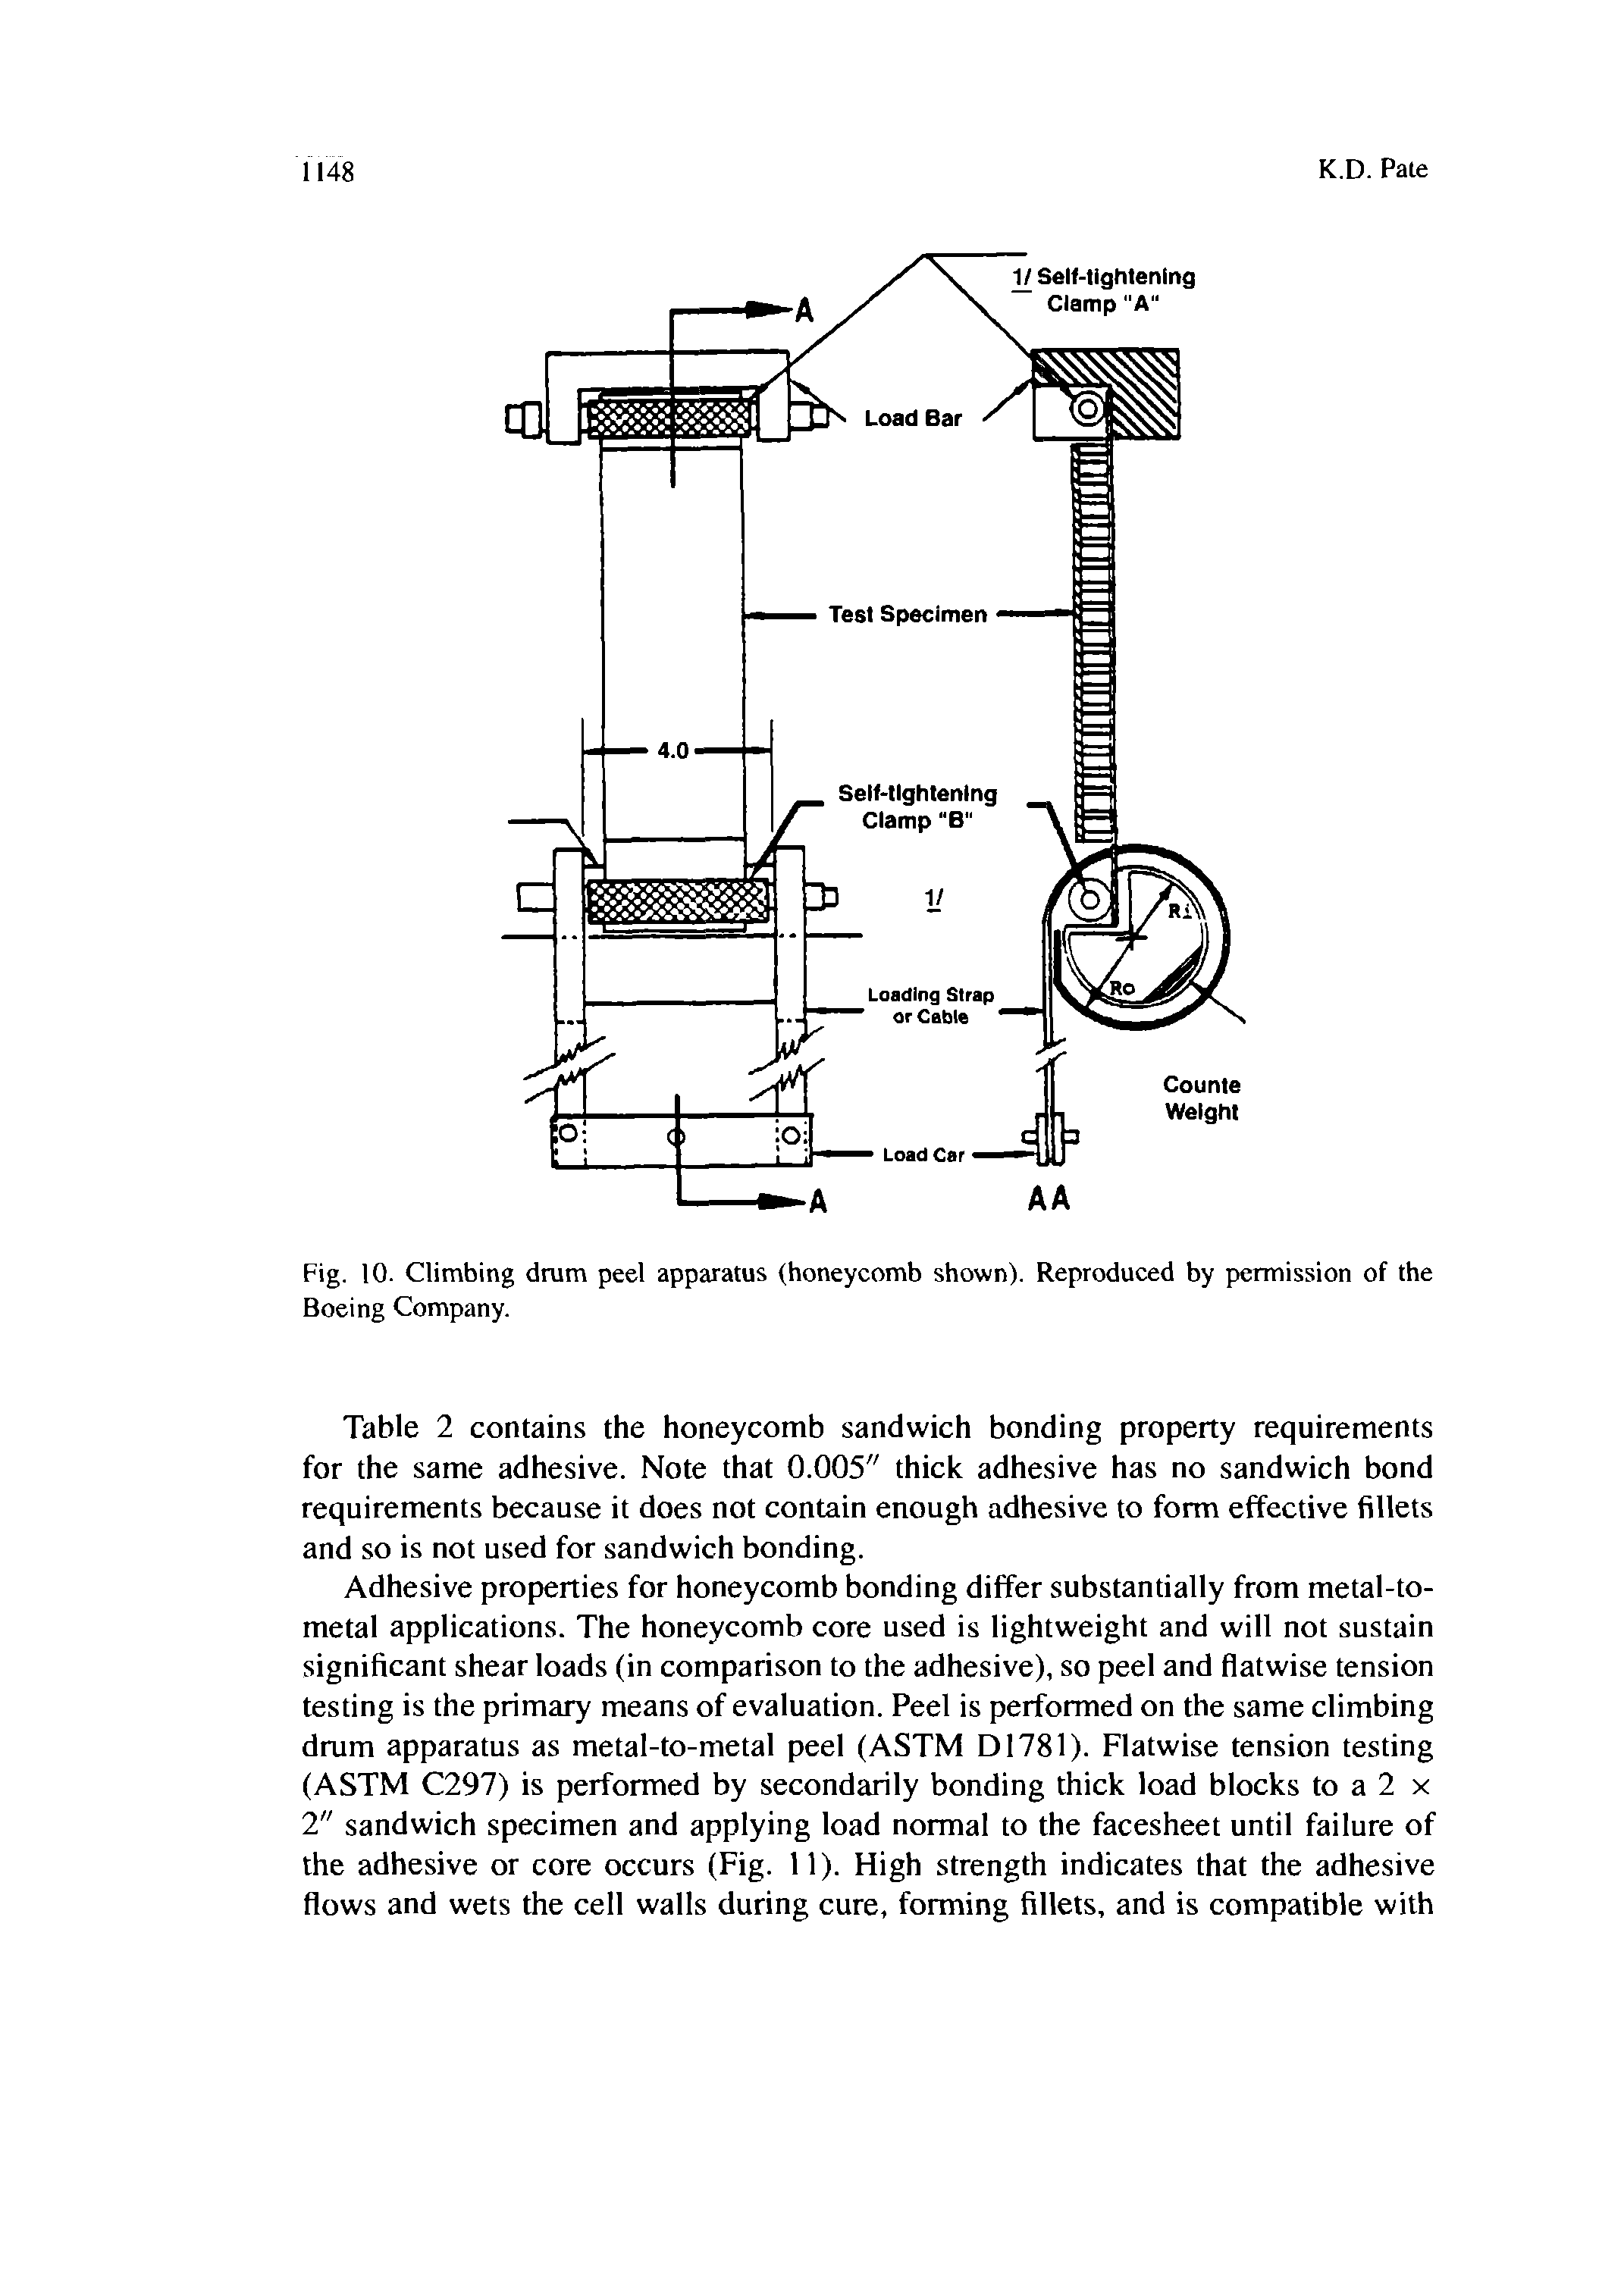 Fig. 10. Climbing drum peel apparatus (honeycomb shown). Reproduced by permission of the Boeing Company.